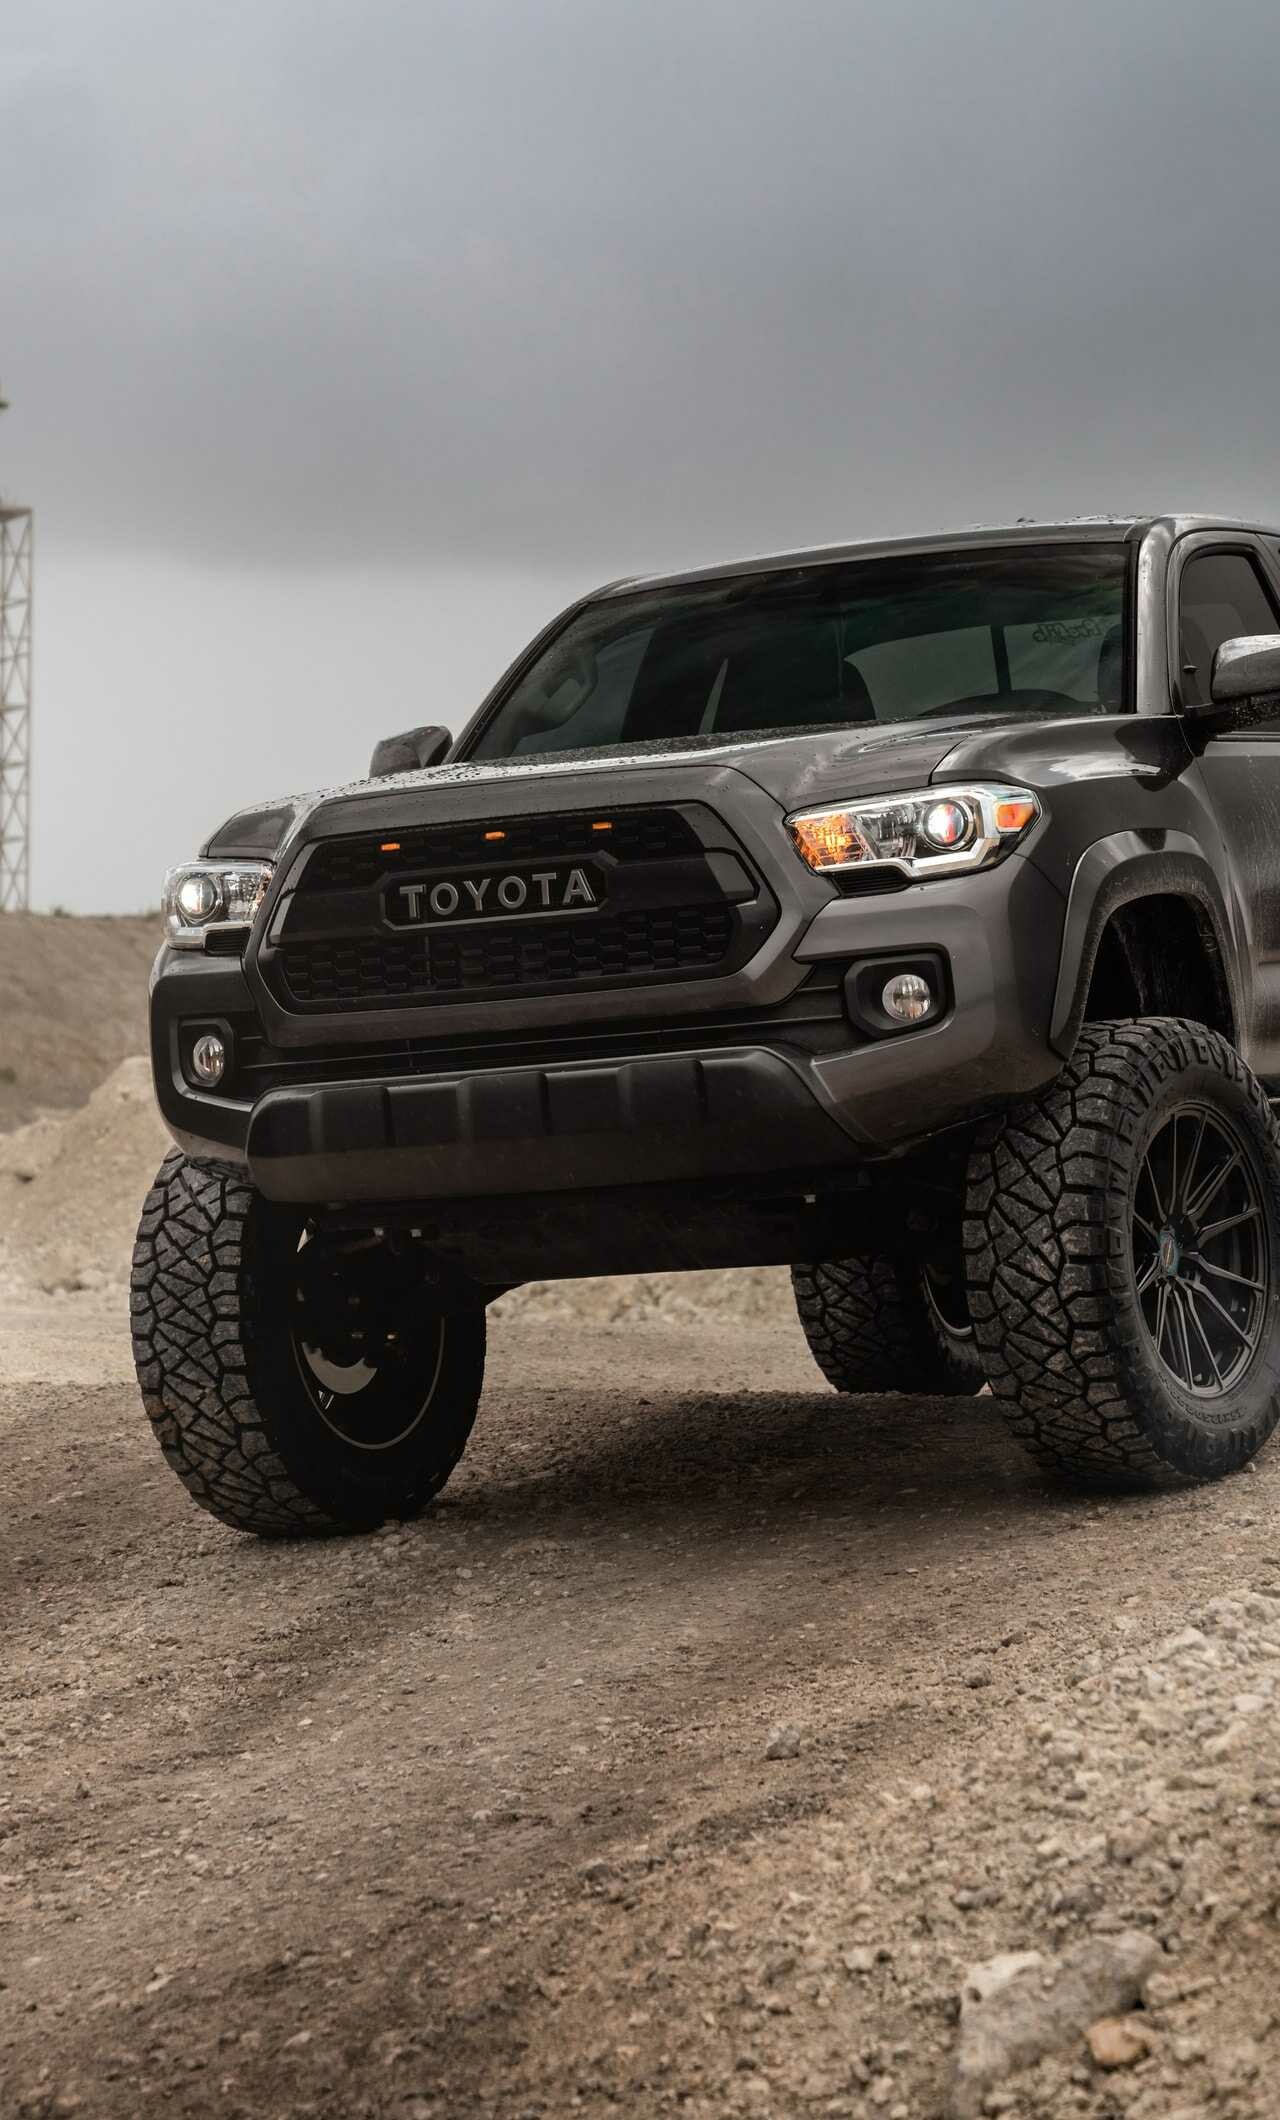 Toyota Tacoma: The T/X Baja package includes TRD Bilstein coil-overs at the front and TRD Bilstein reservoir shocks at the rear. 1280x2120 HD Background.